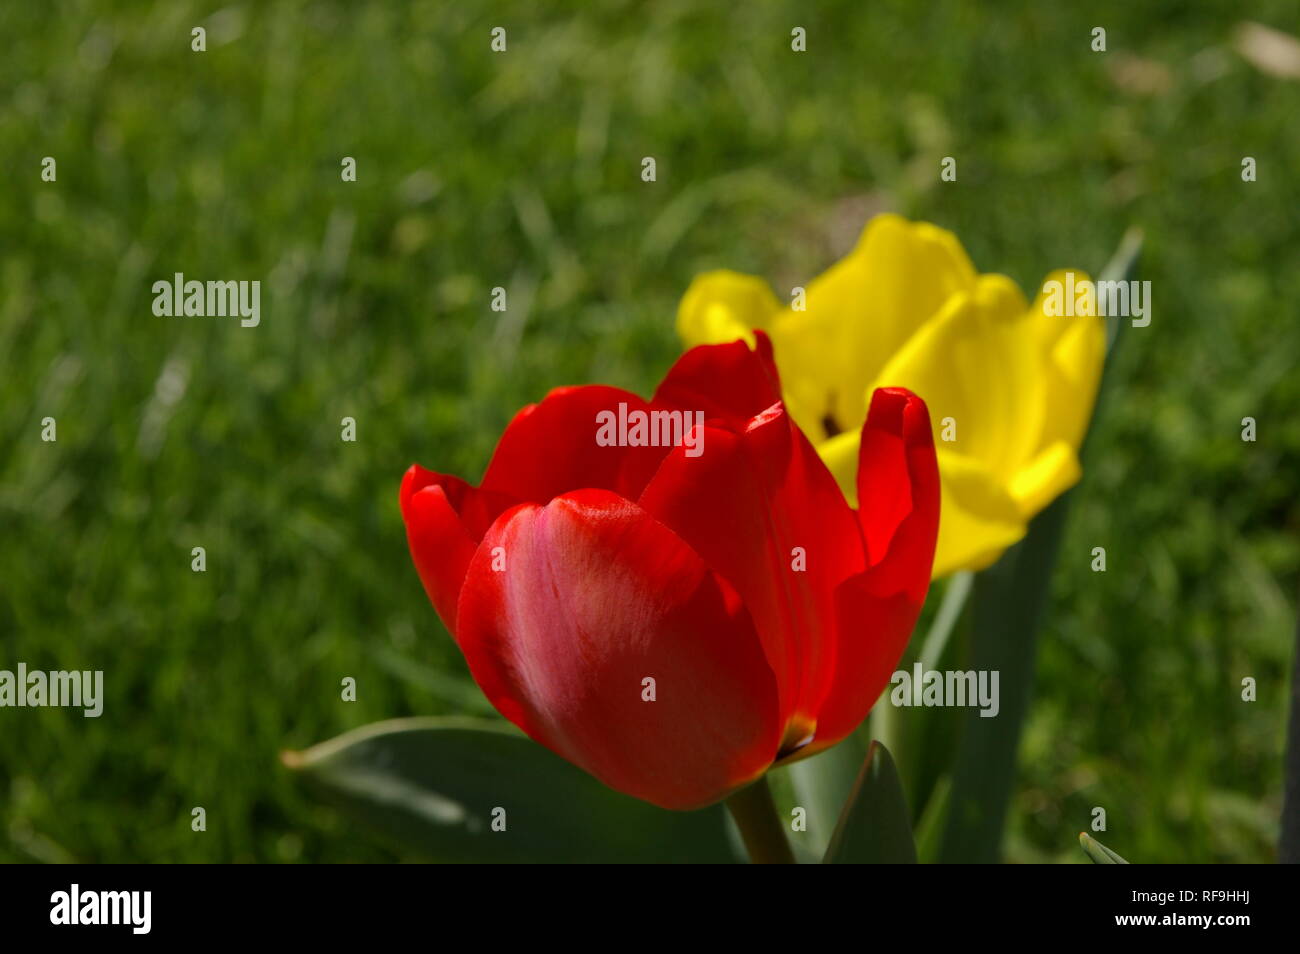 Close-up of one red and one yellow tulip with green background Stock Photo